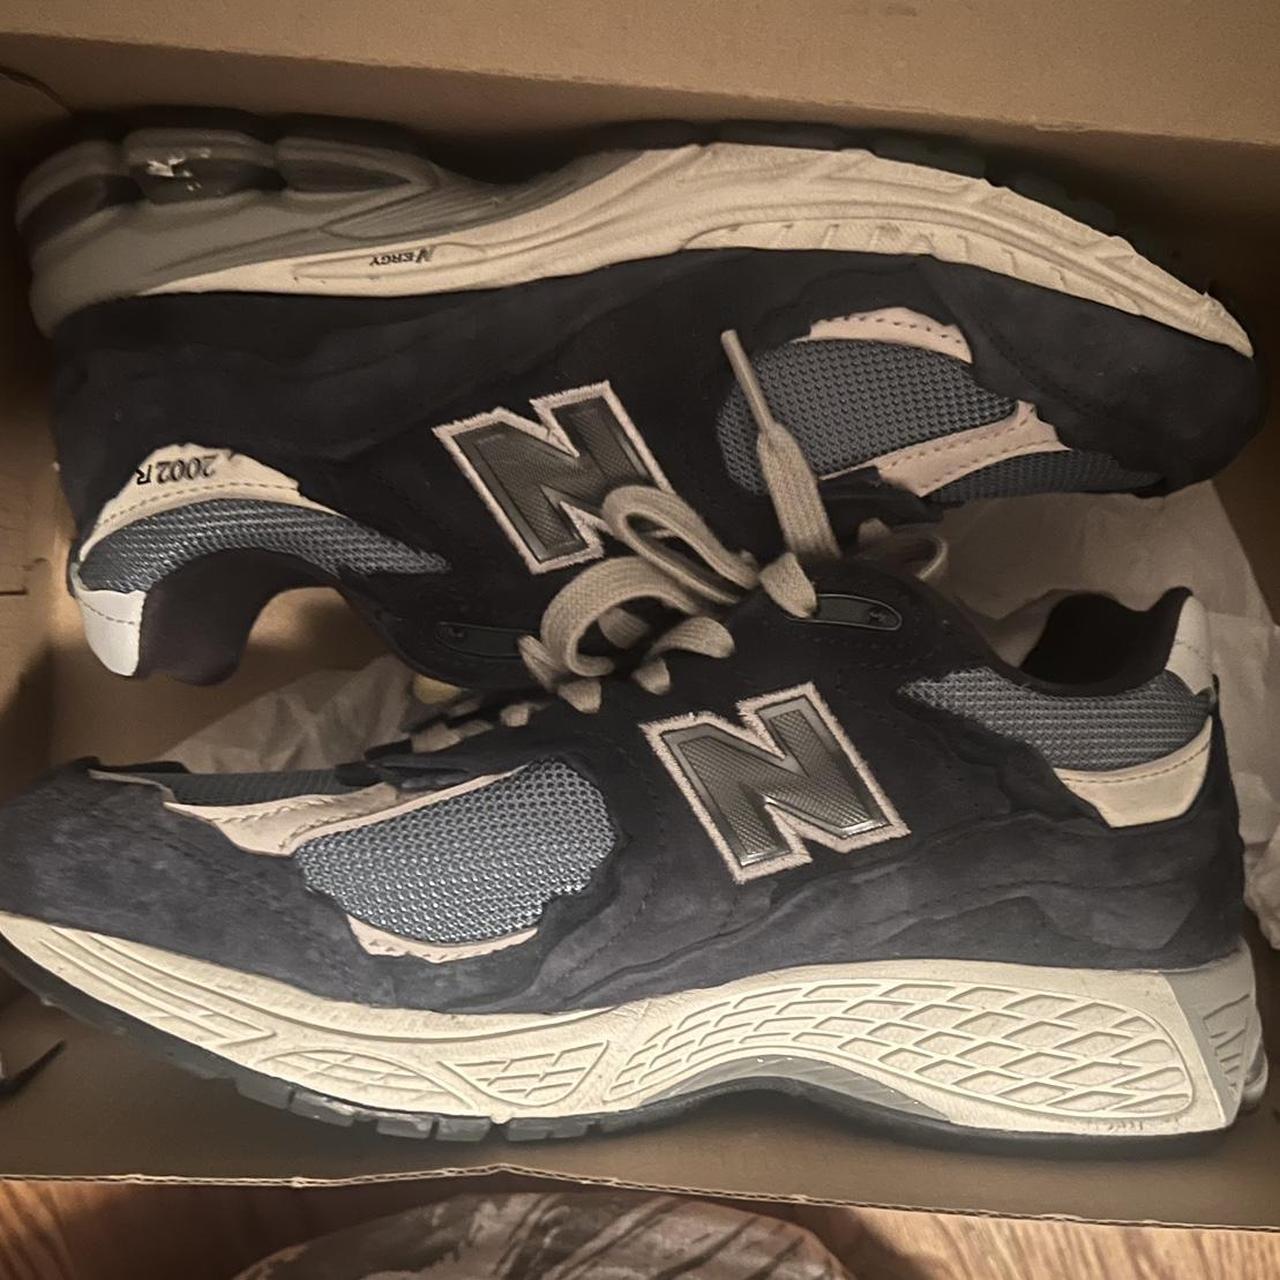 New Balance Women's Blue and Navy Trainers (4)